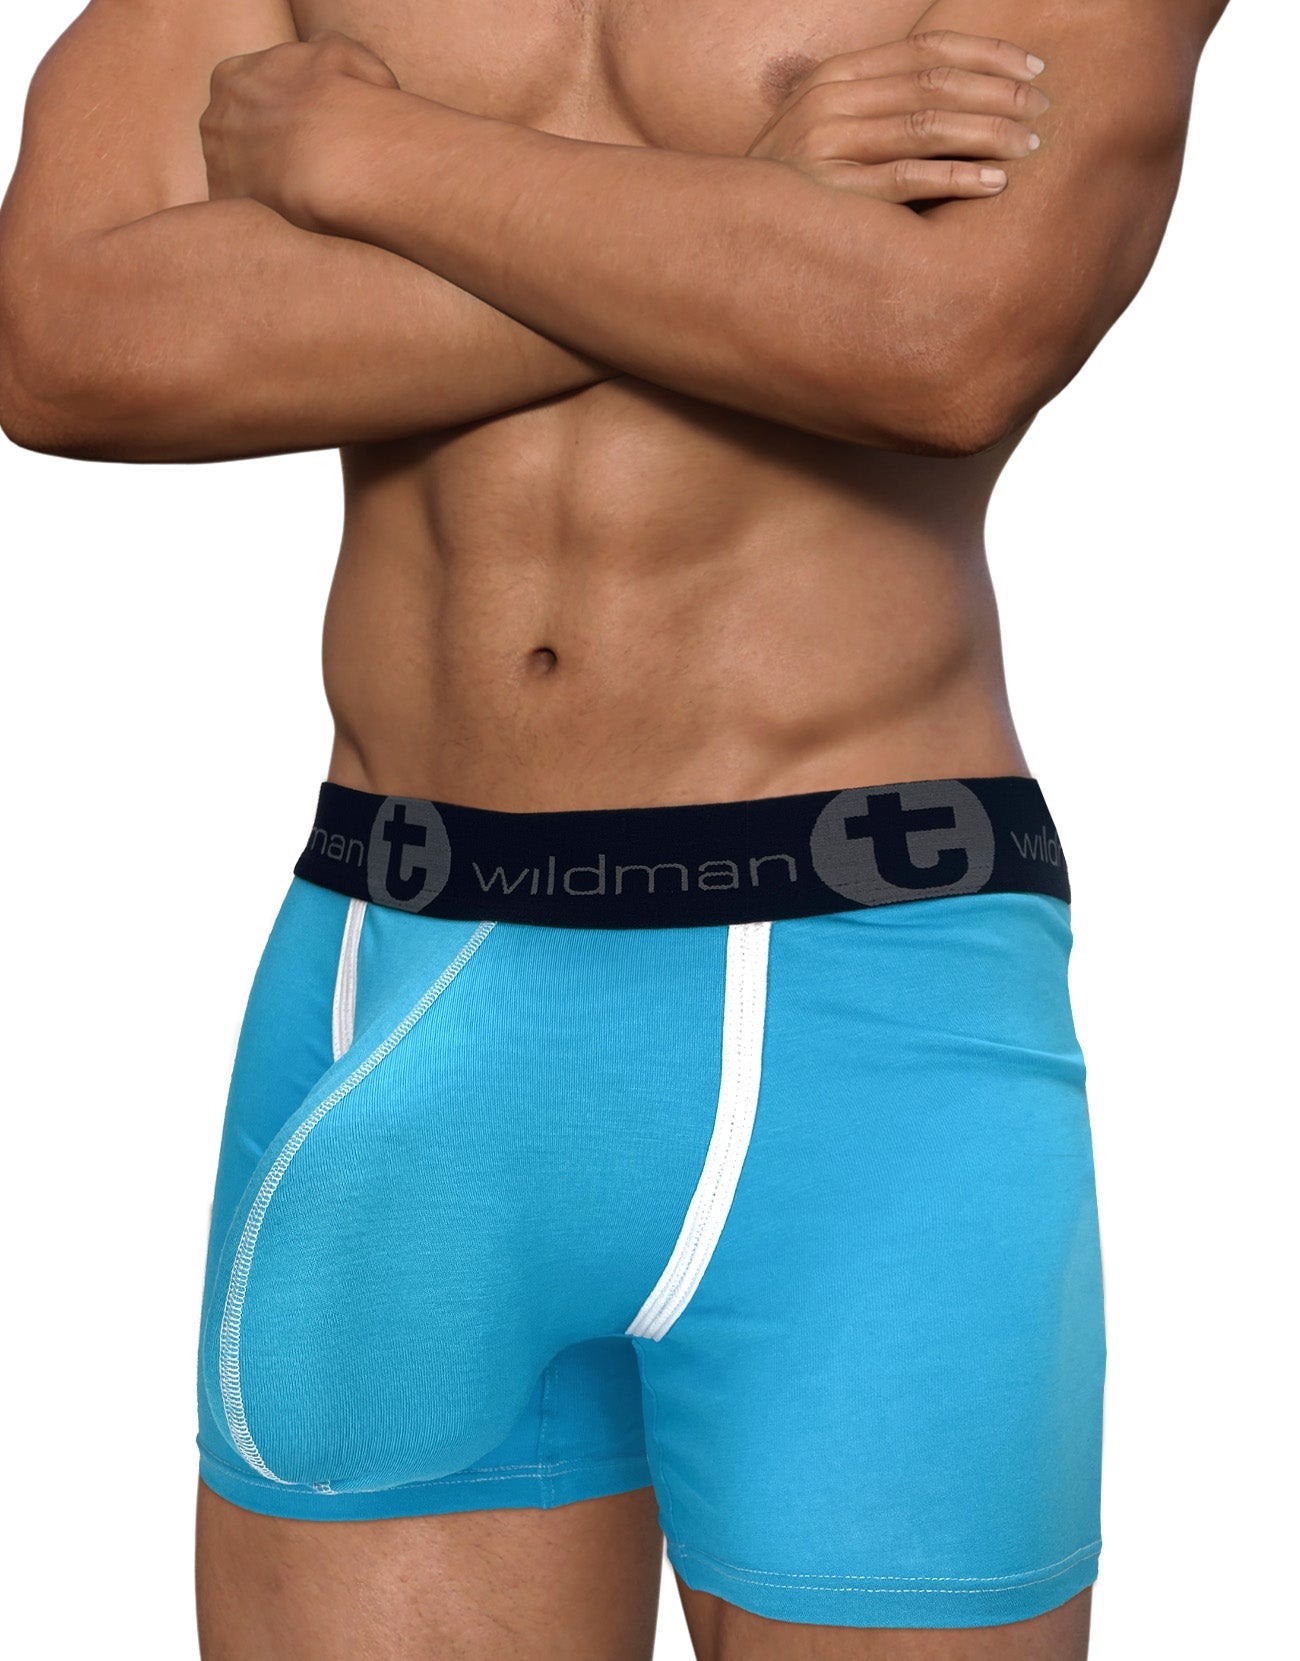 WildmanT Modal Monster Cock 5" Inseam Boxer Brief Baby Blue - DealByEthan.gay